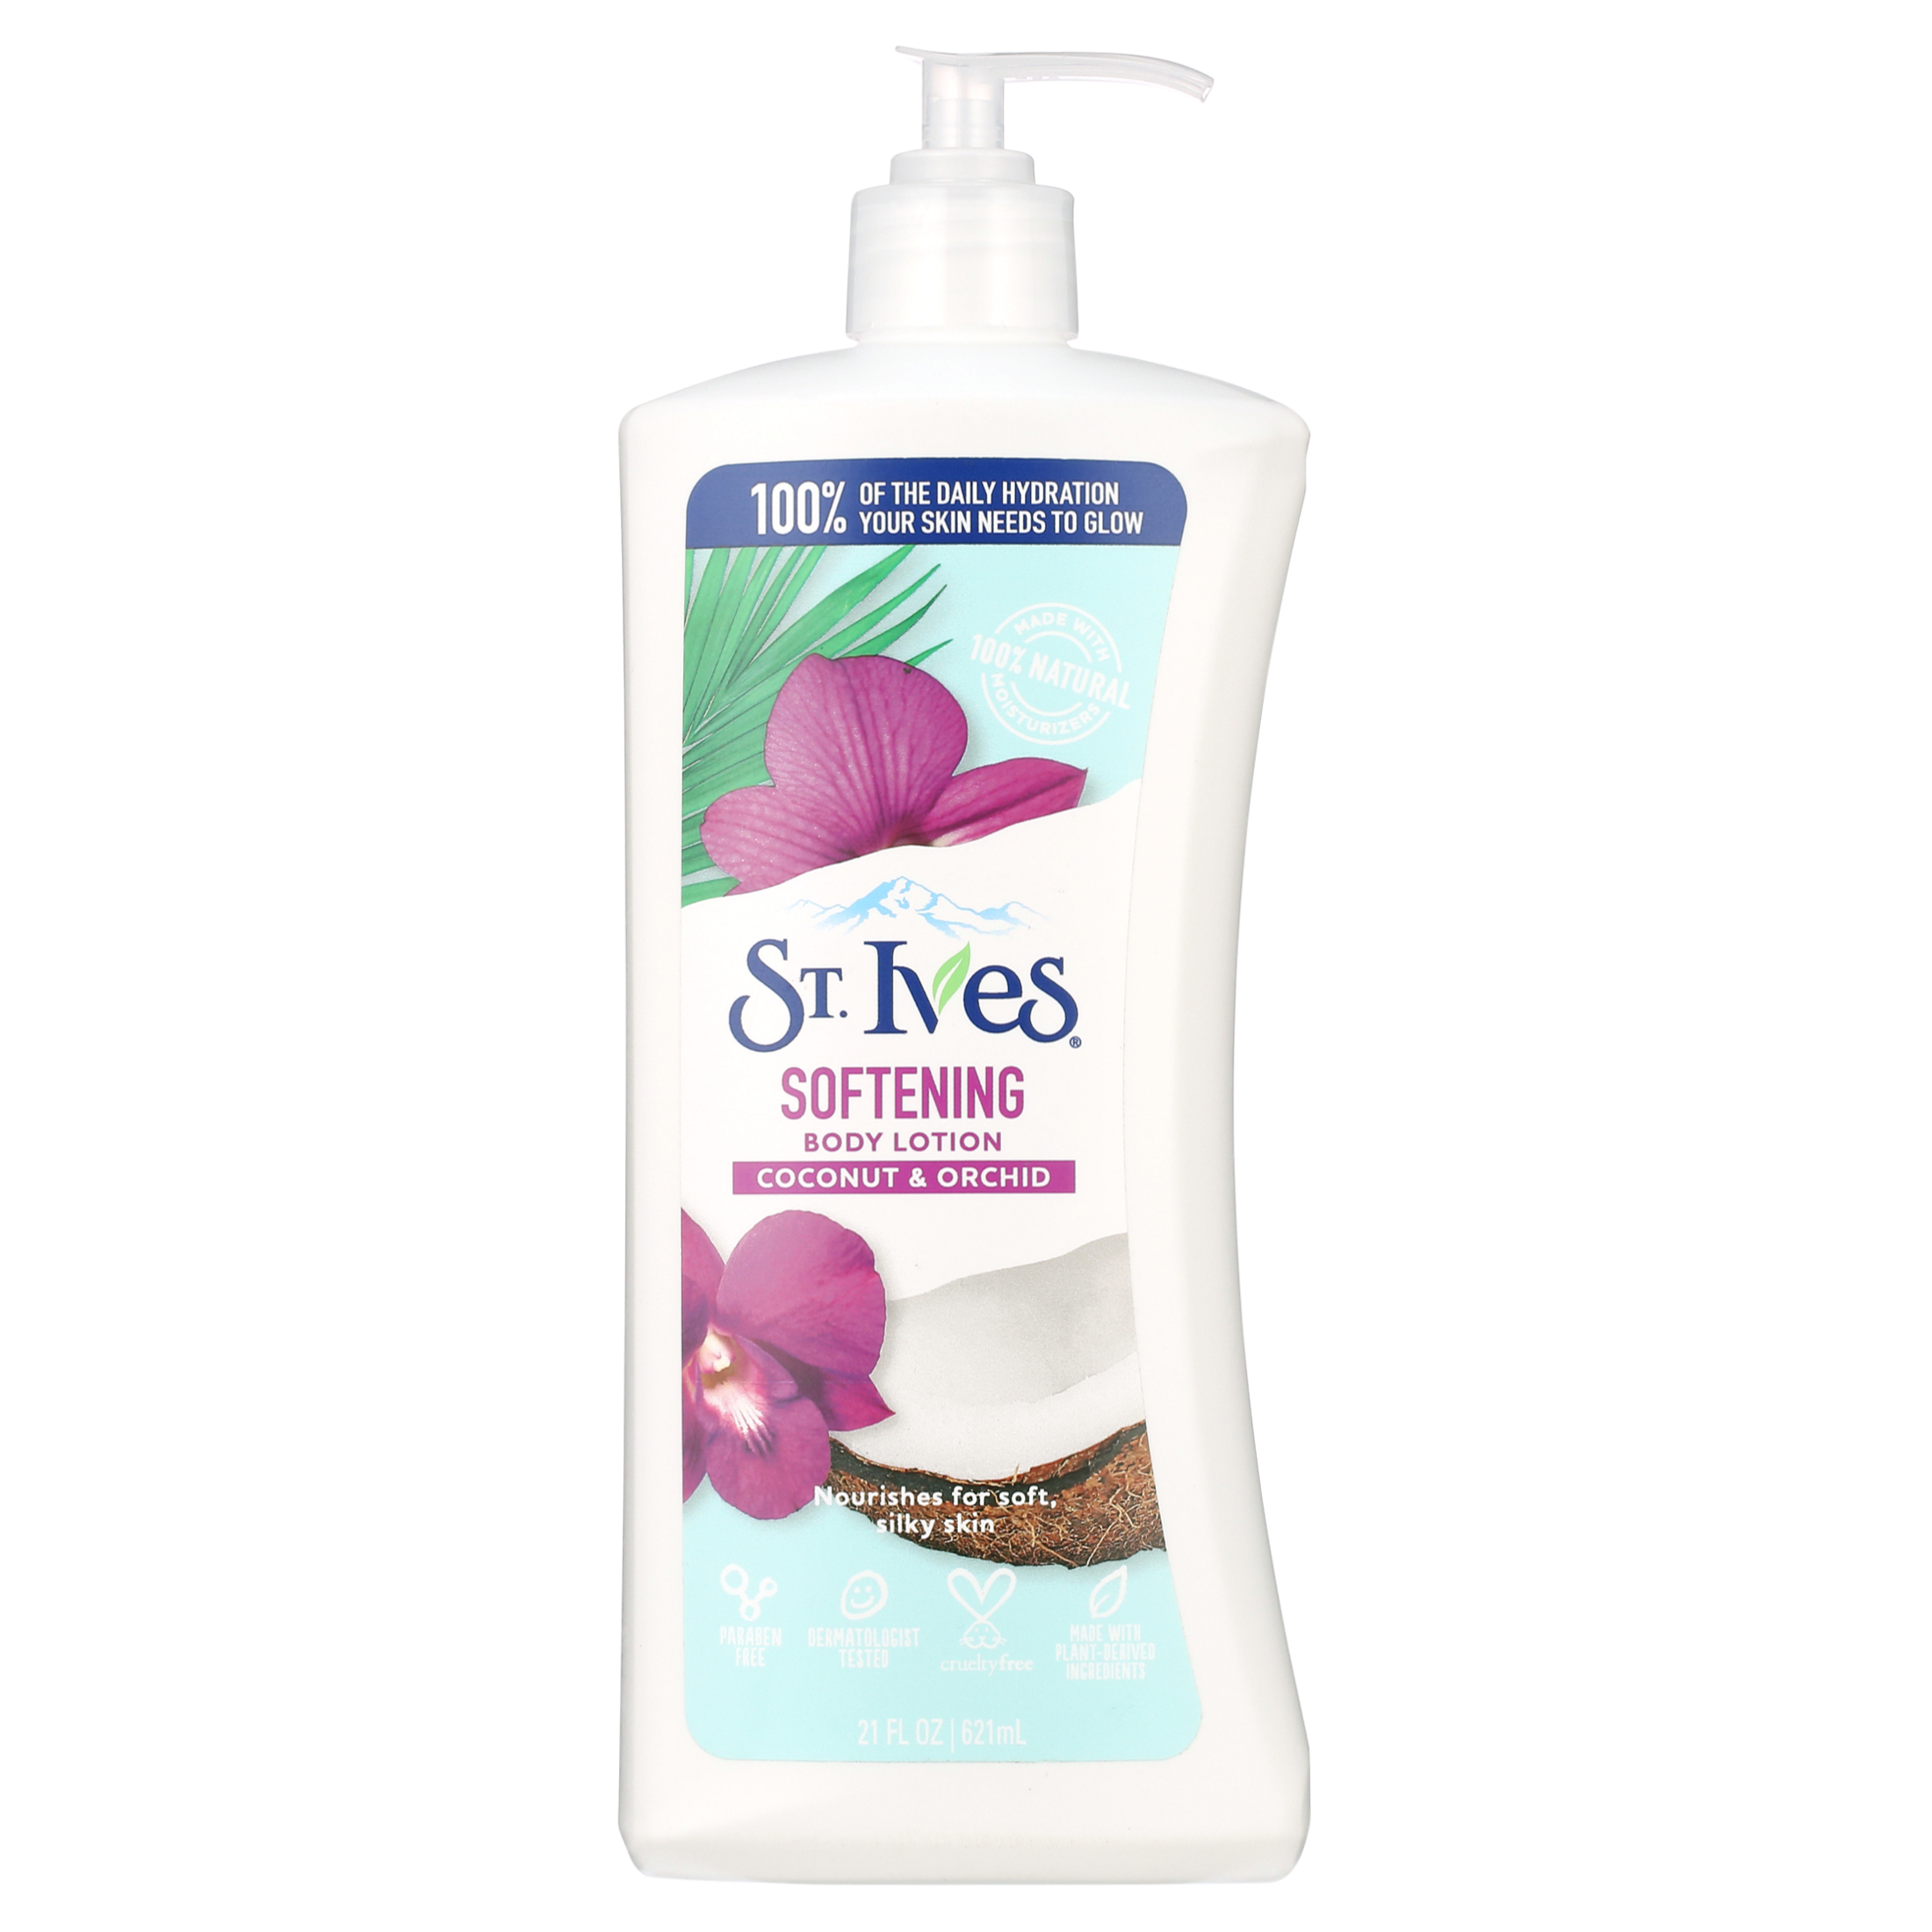 St. Ives Softening Body Lotion Coconut and Orchid 21 oz - image 1 of 10